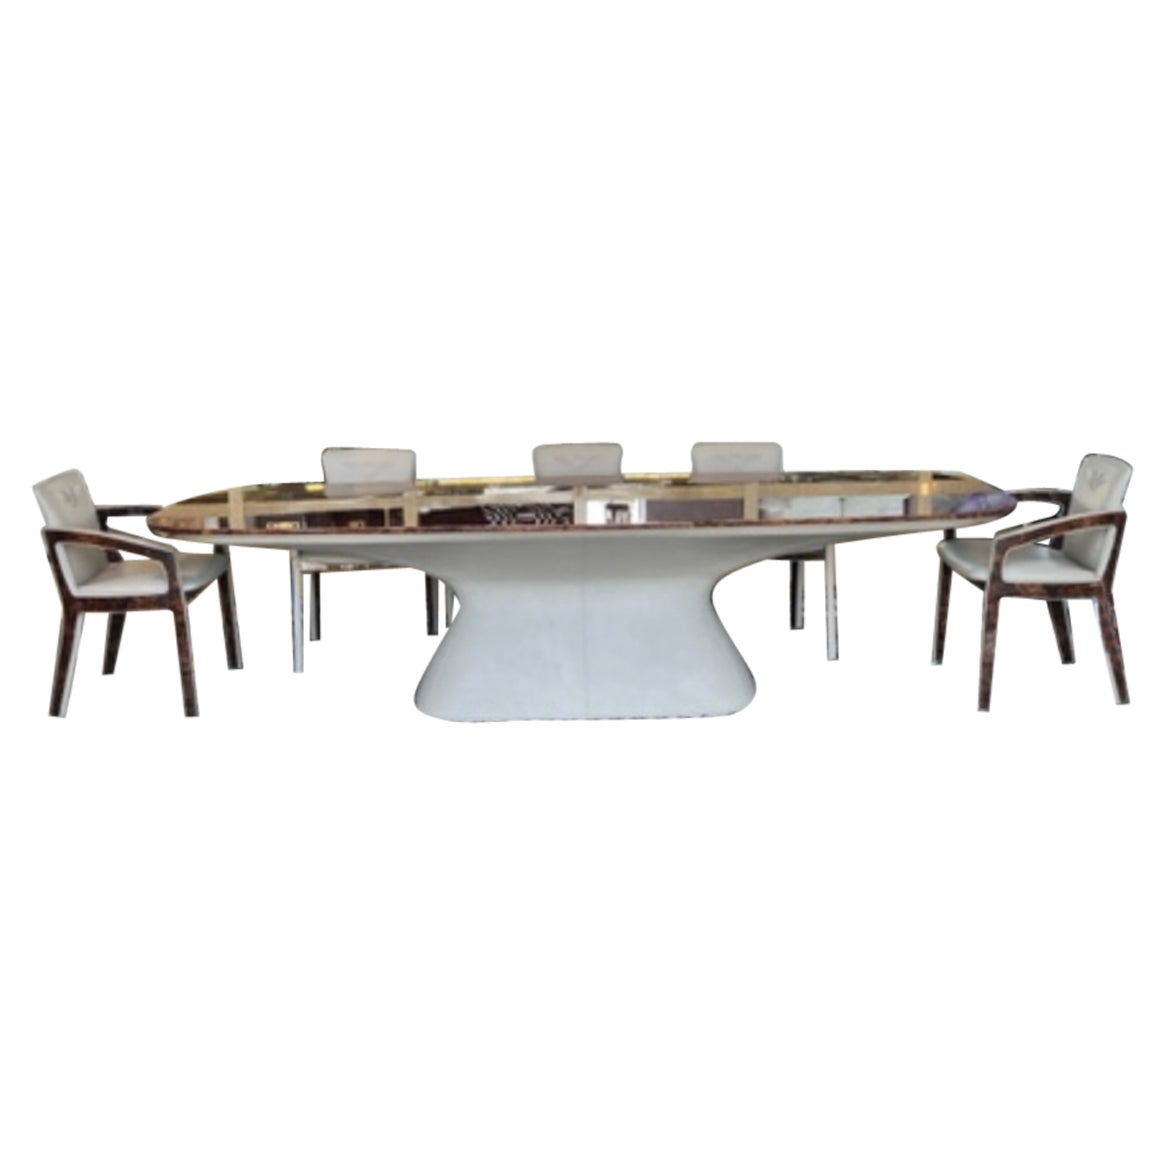 Bentley Home Walnut Burl and Leather Dining Table and Chairs For Sale